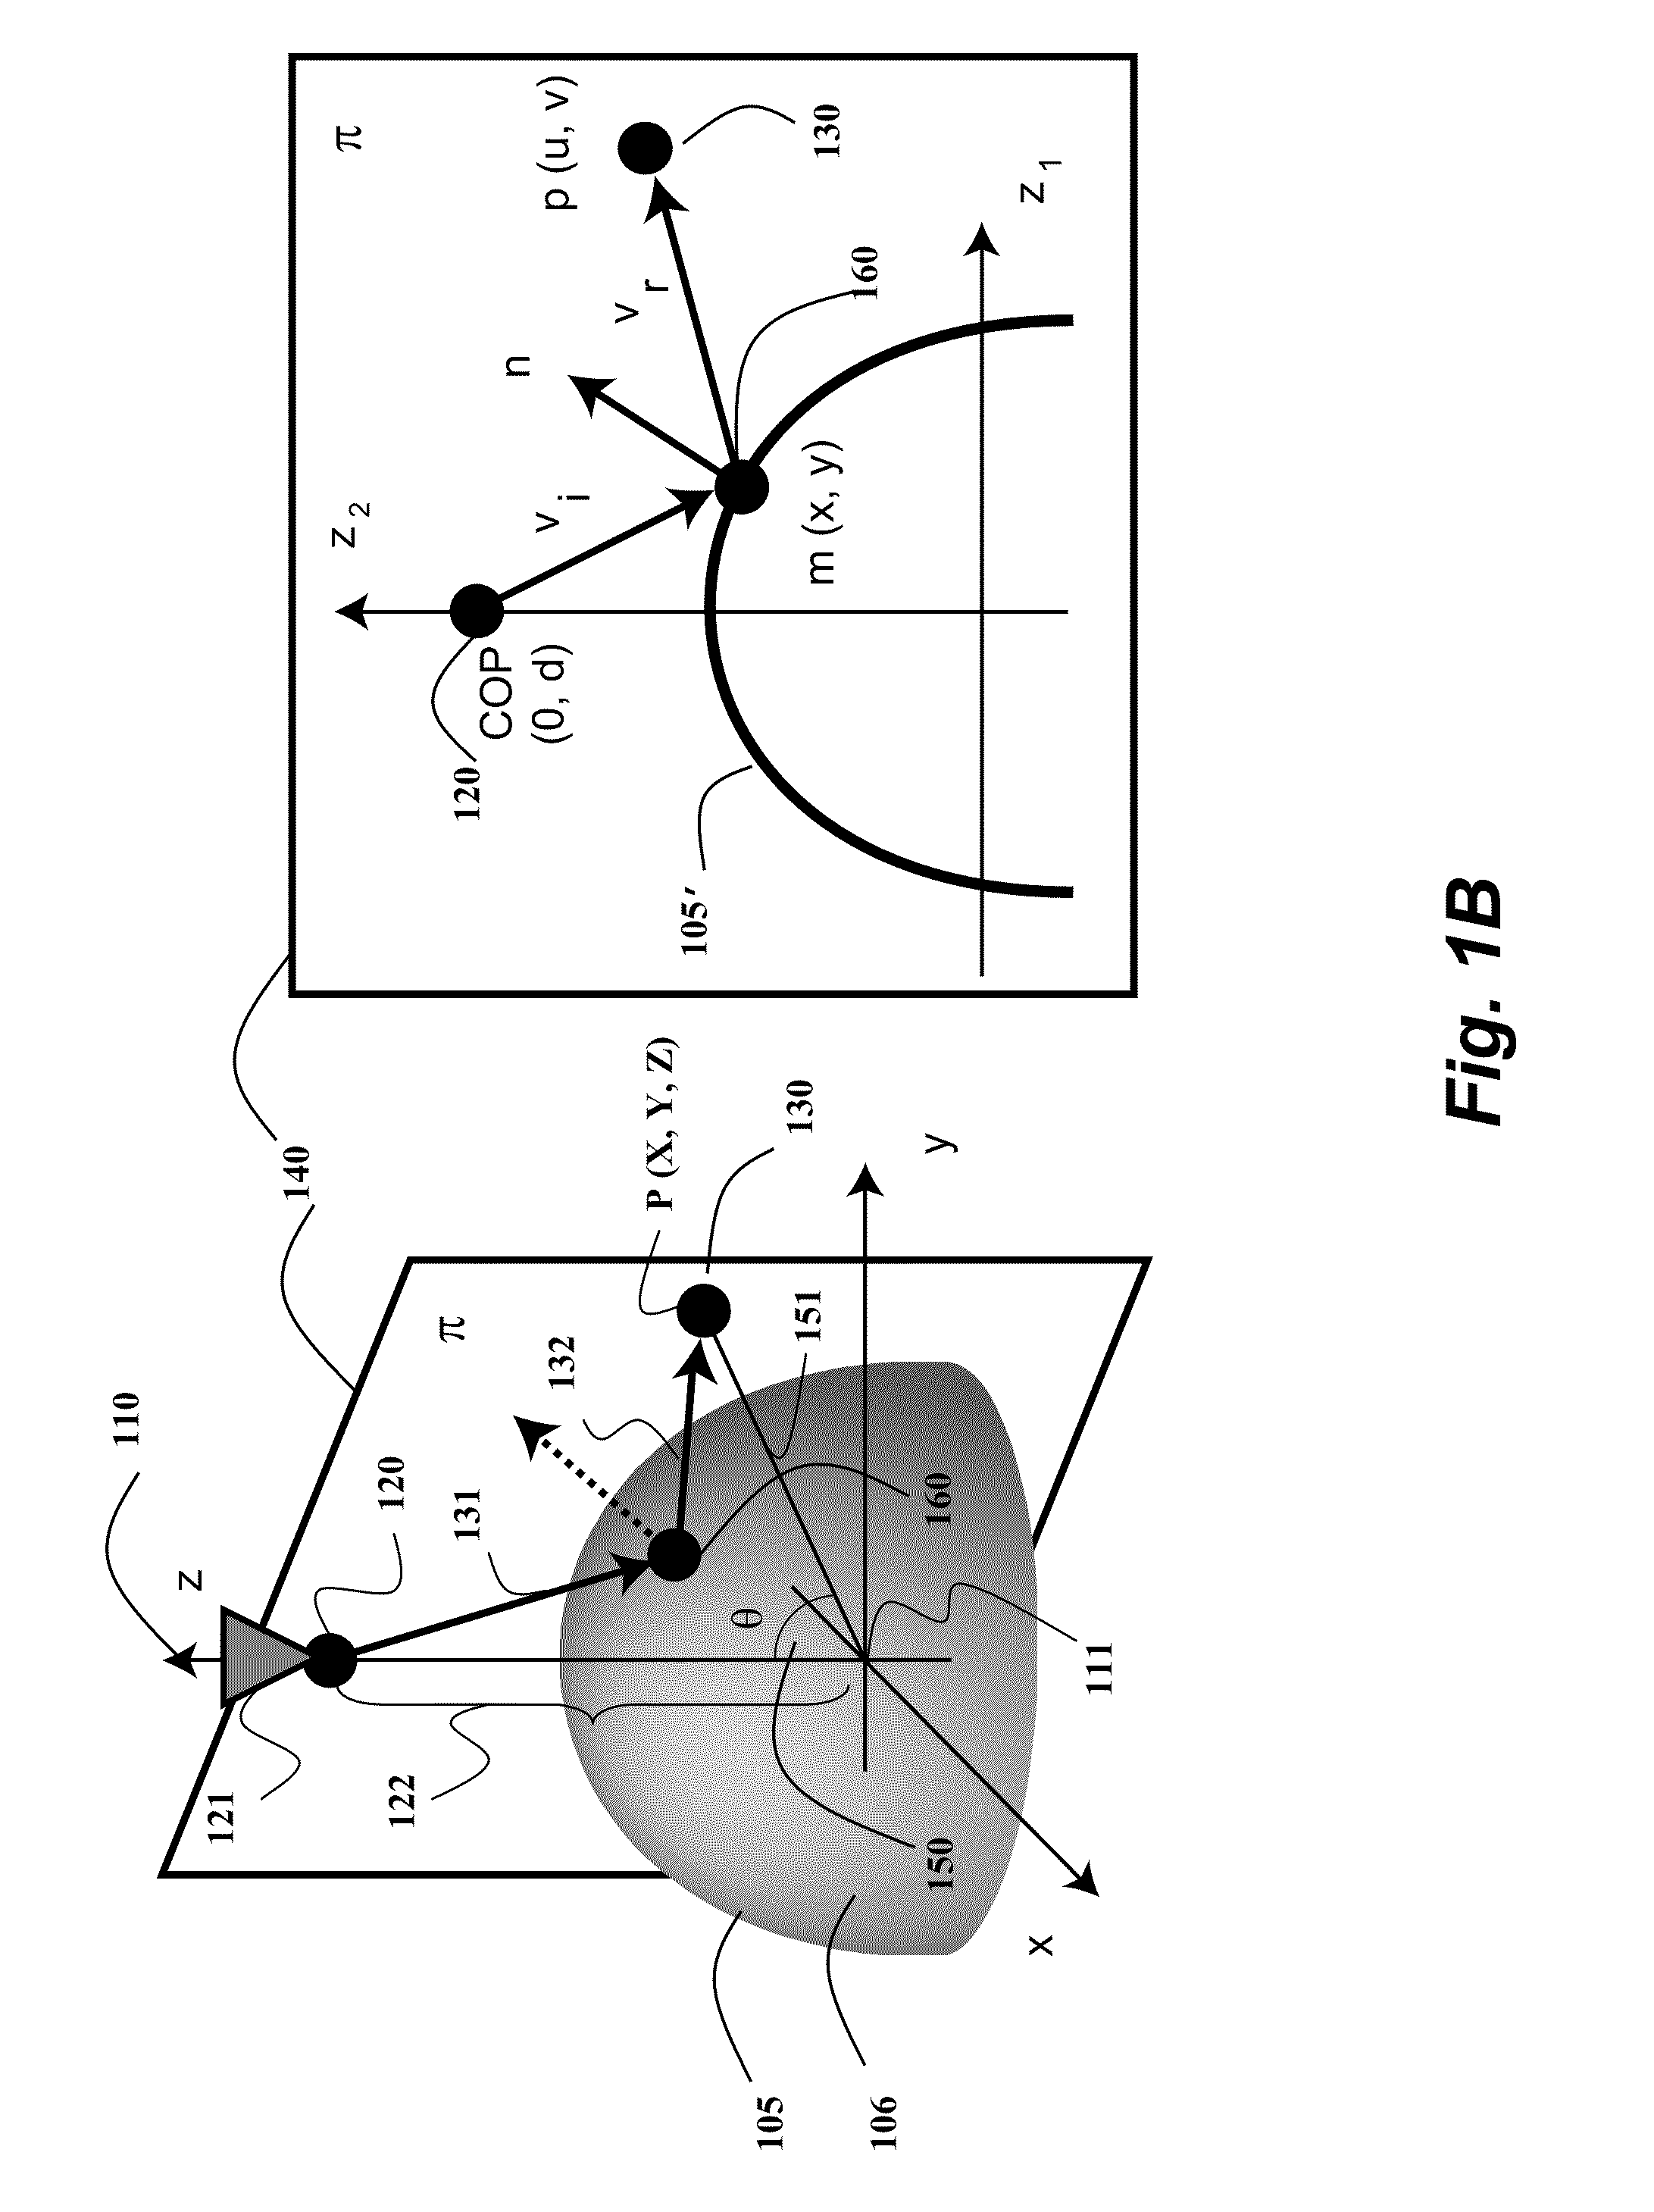 Method and System for Determining Projections in Non-Central Catadioptric Optical Systems